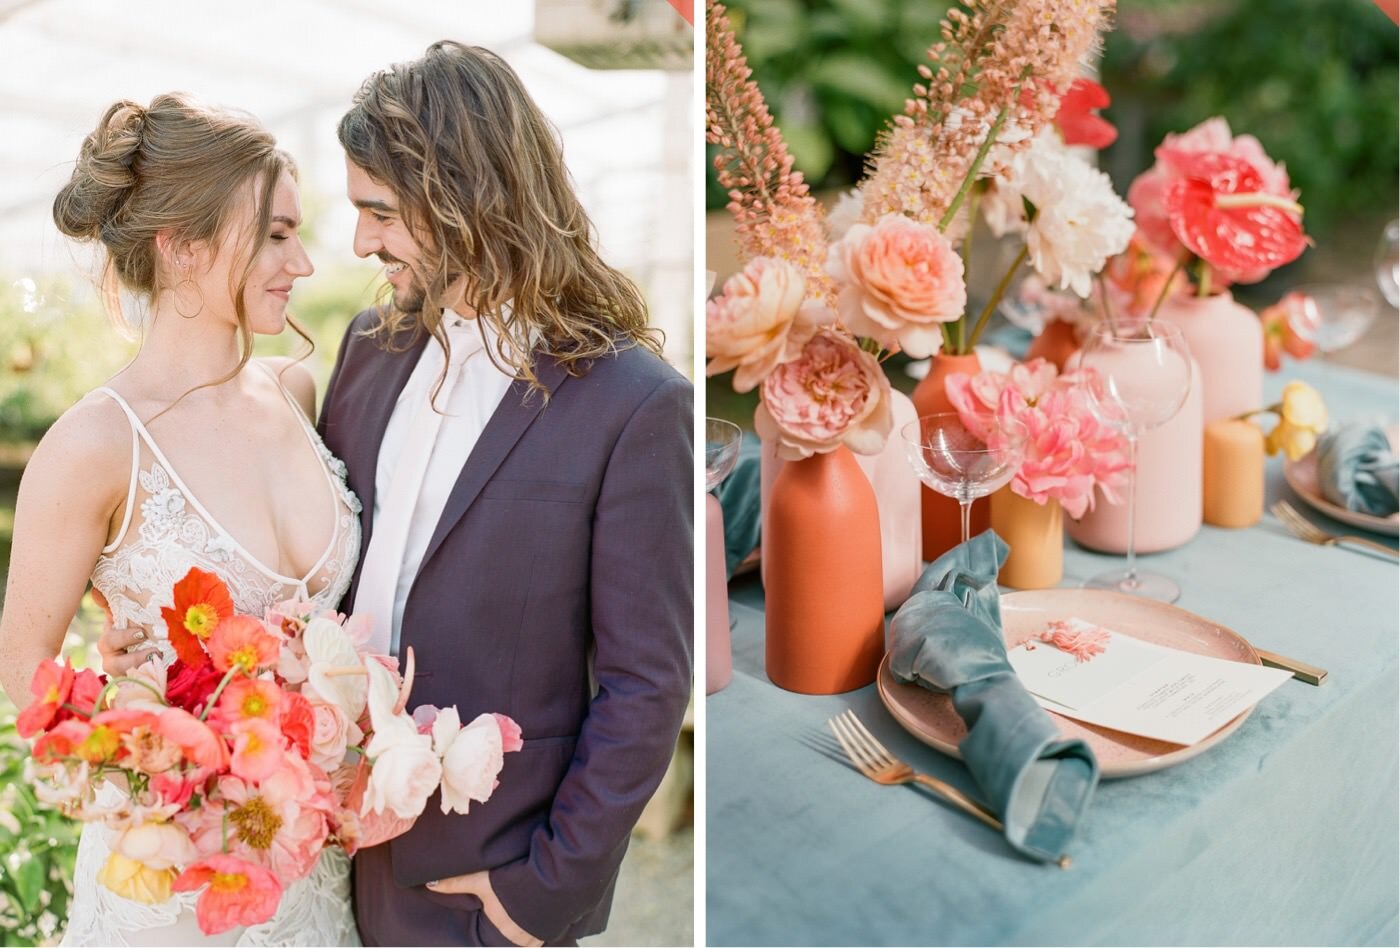 A Modern, Colorful Greenhouse Wedding Editorial at Christianson's Nursey